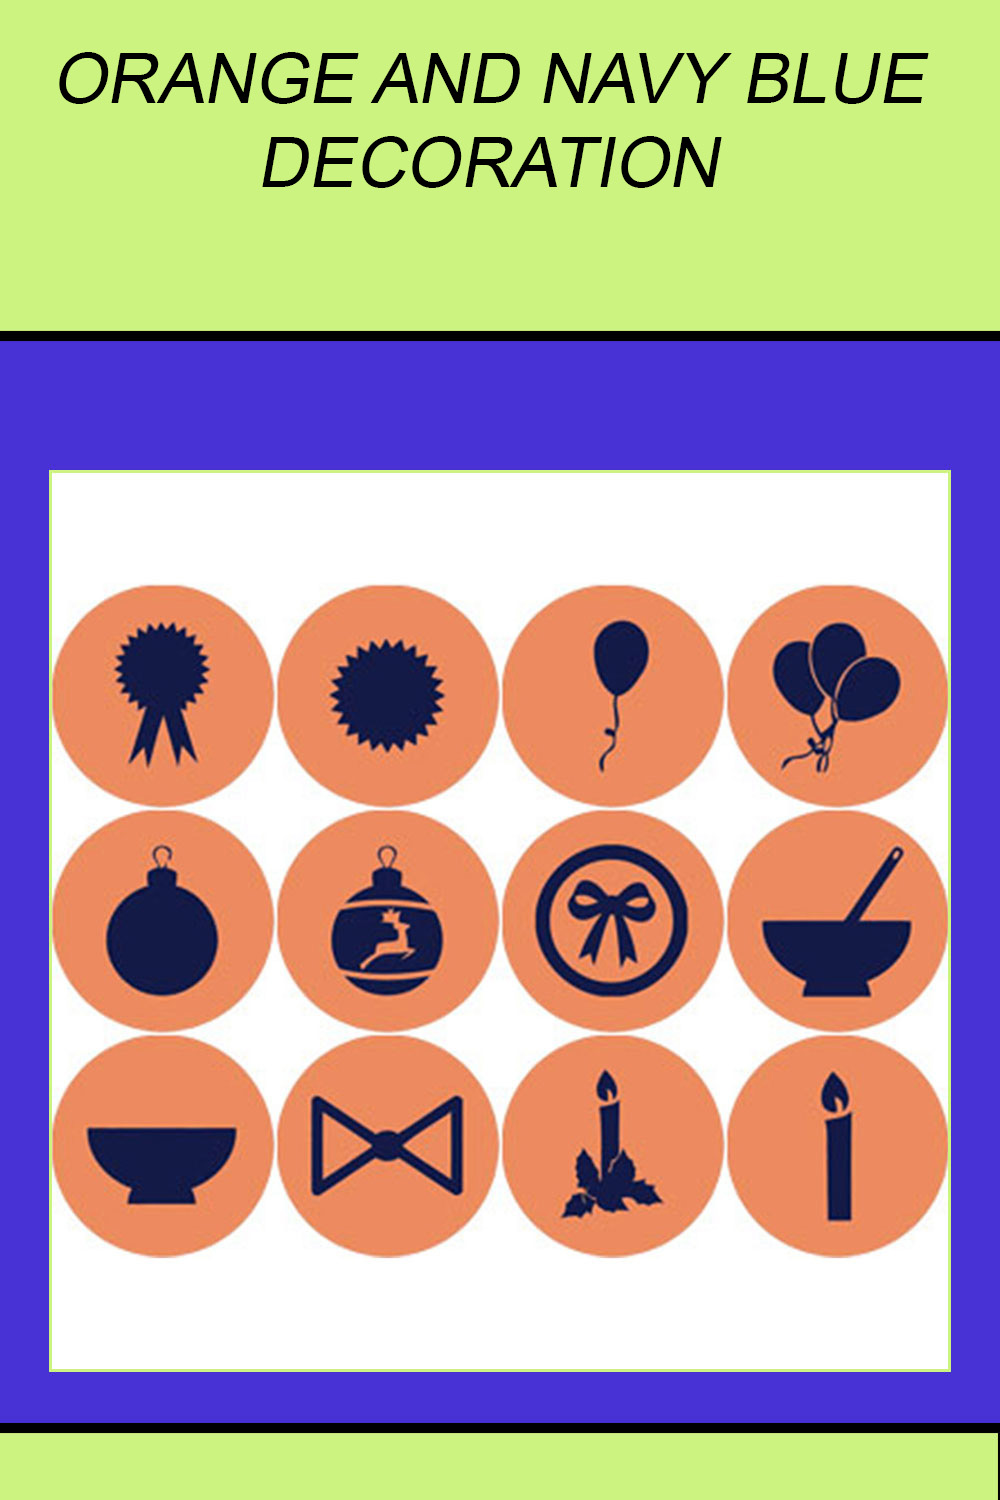 ORANGE AND NAVY BLUE DECORATION ROUND ICONS pinterest preview image.